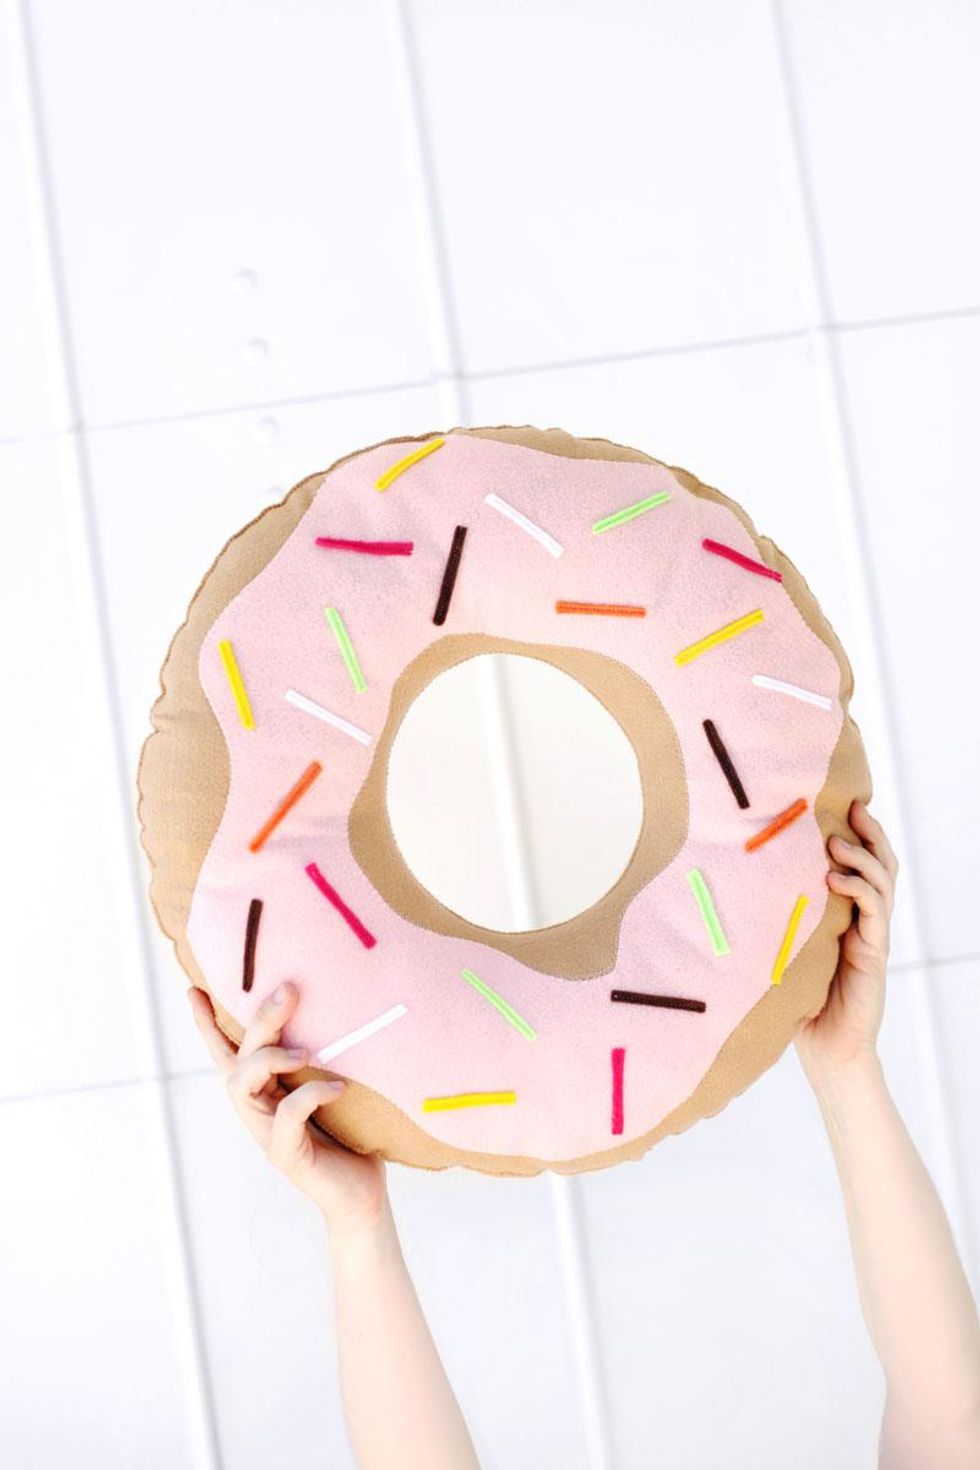 diy donut pillow with pink icing and rainbow sprinkles